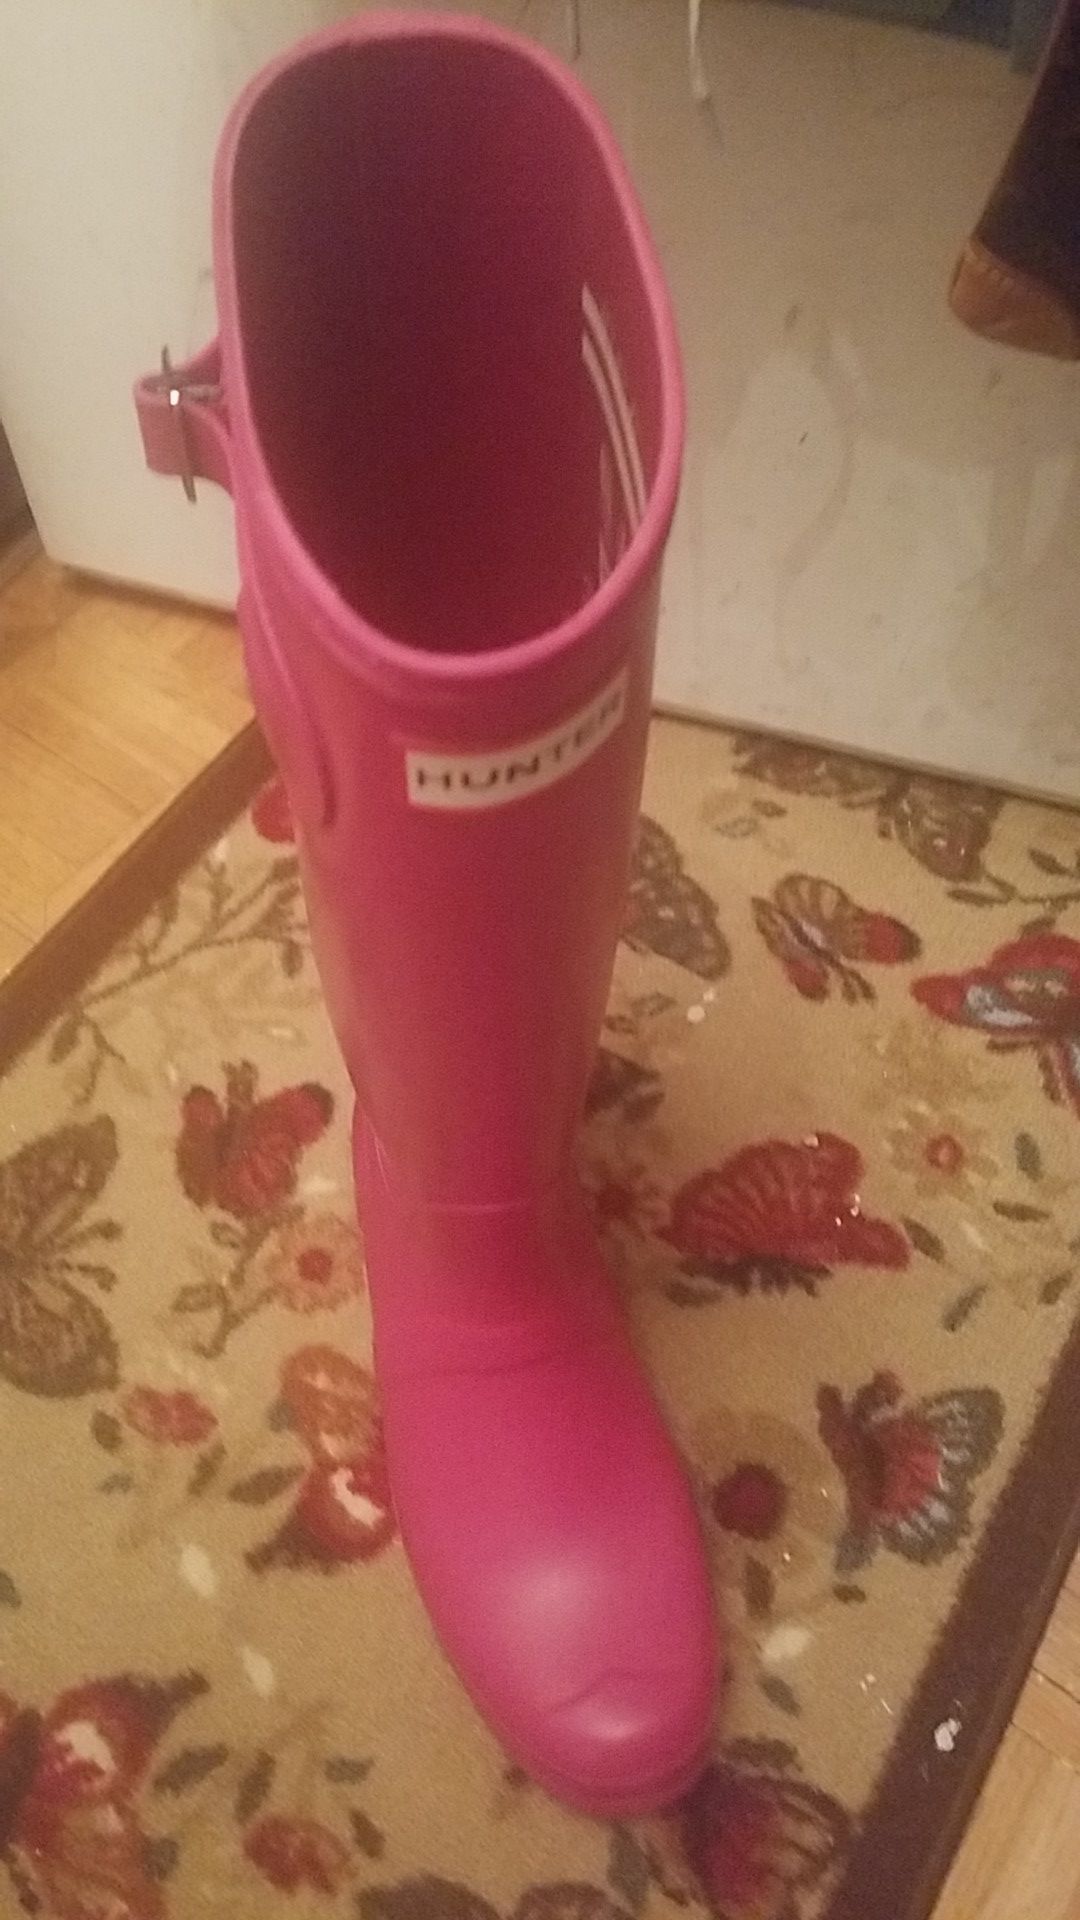 New s,10 wmns hunter boots yes available